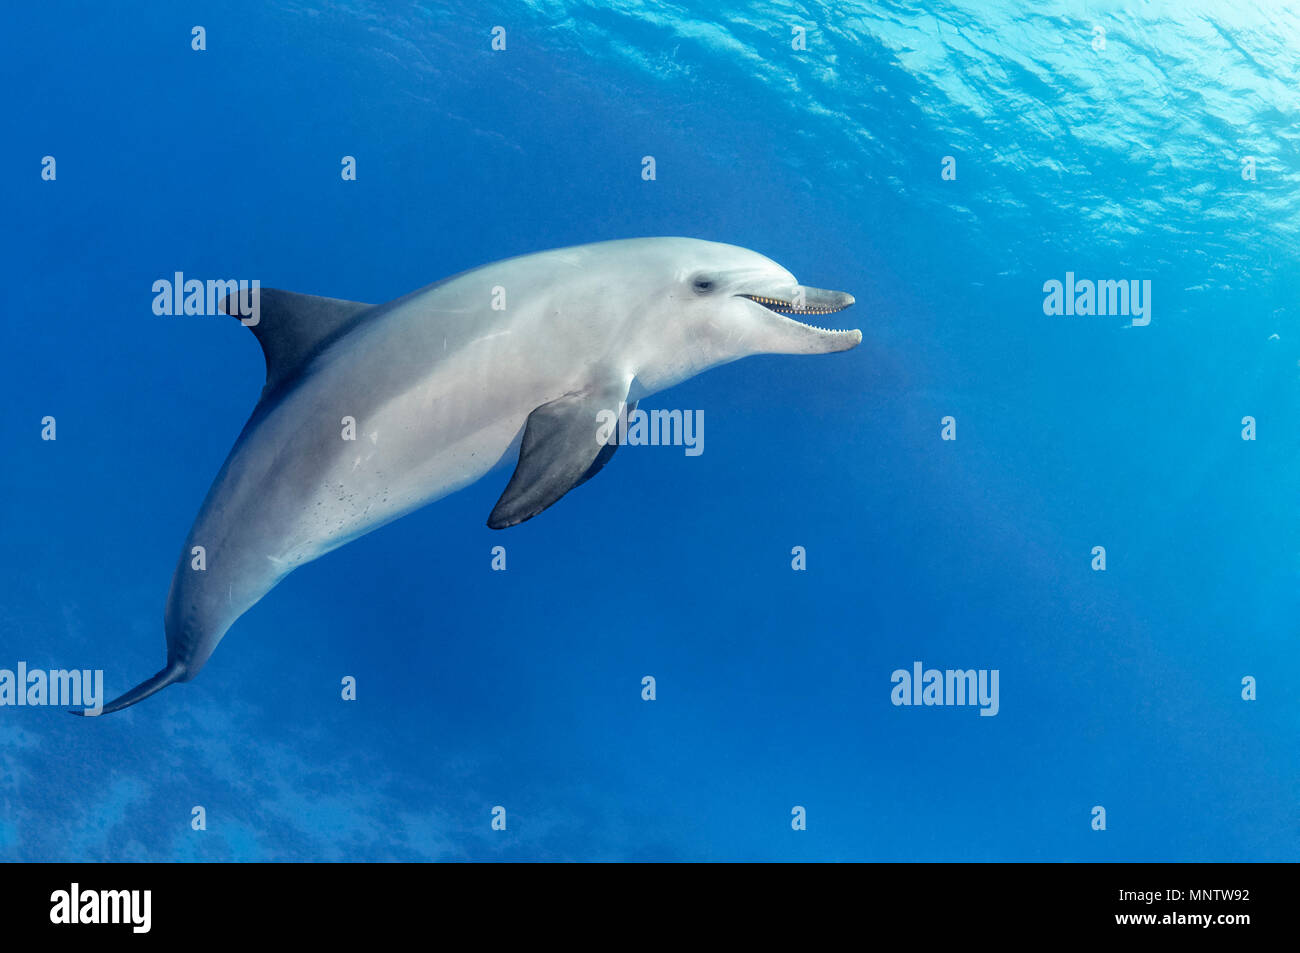 Indo-Pacific bottlenose dolphin, Tursiops aduncus, Yellow Fish Reef, Abu Nuhas, Strait of Gubal, Egypt, Red Sea, Indian Ocean Stock Photo